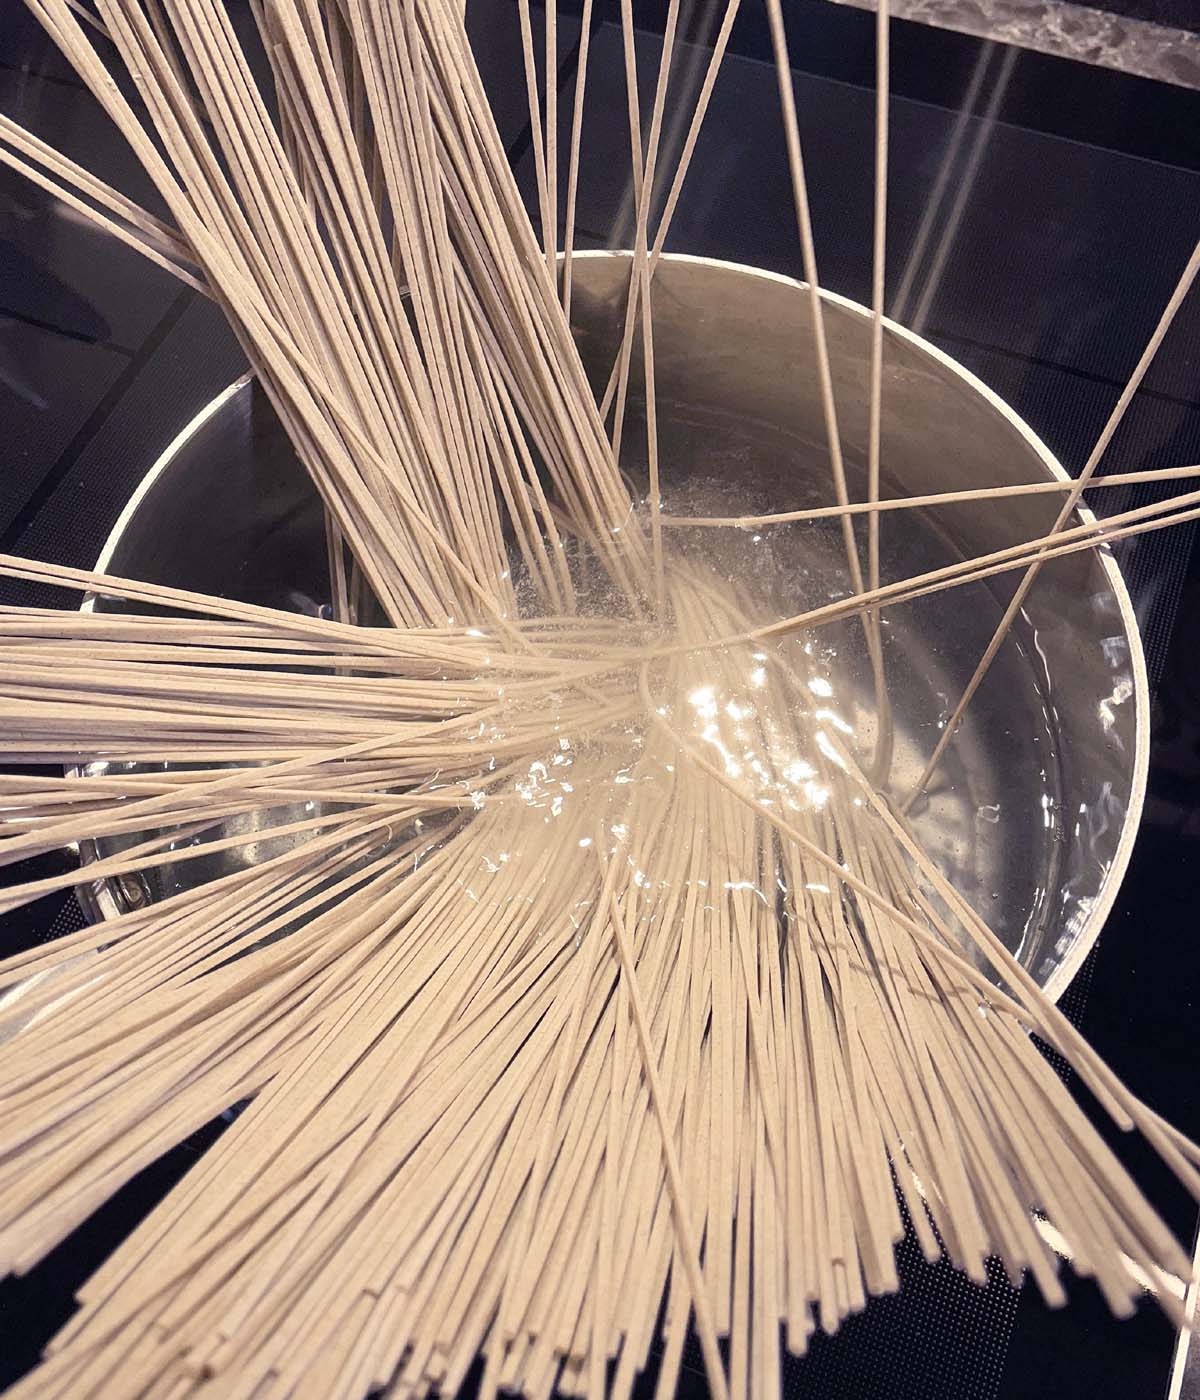 A metal pot with dry noodle sticks in water.